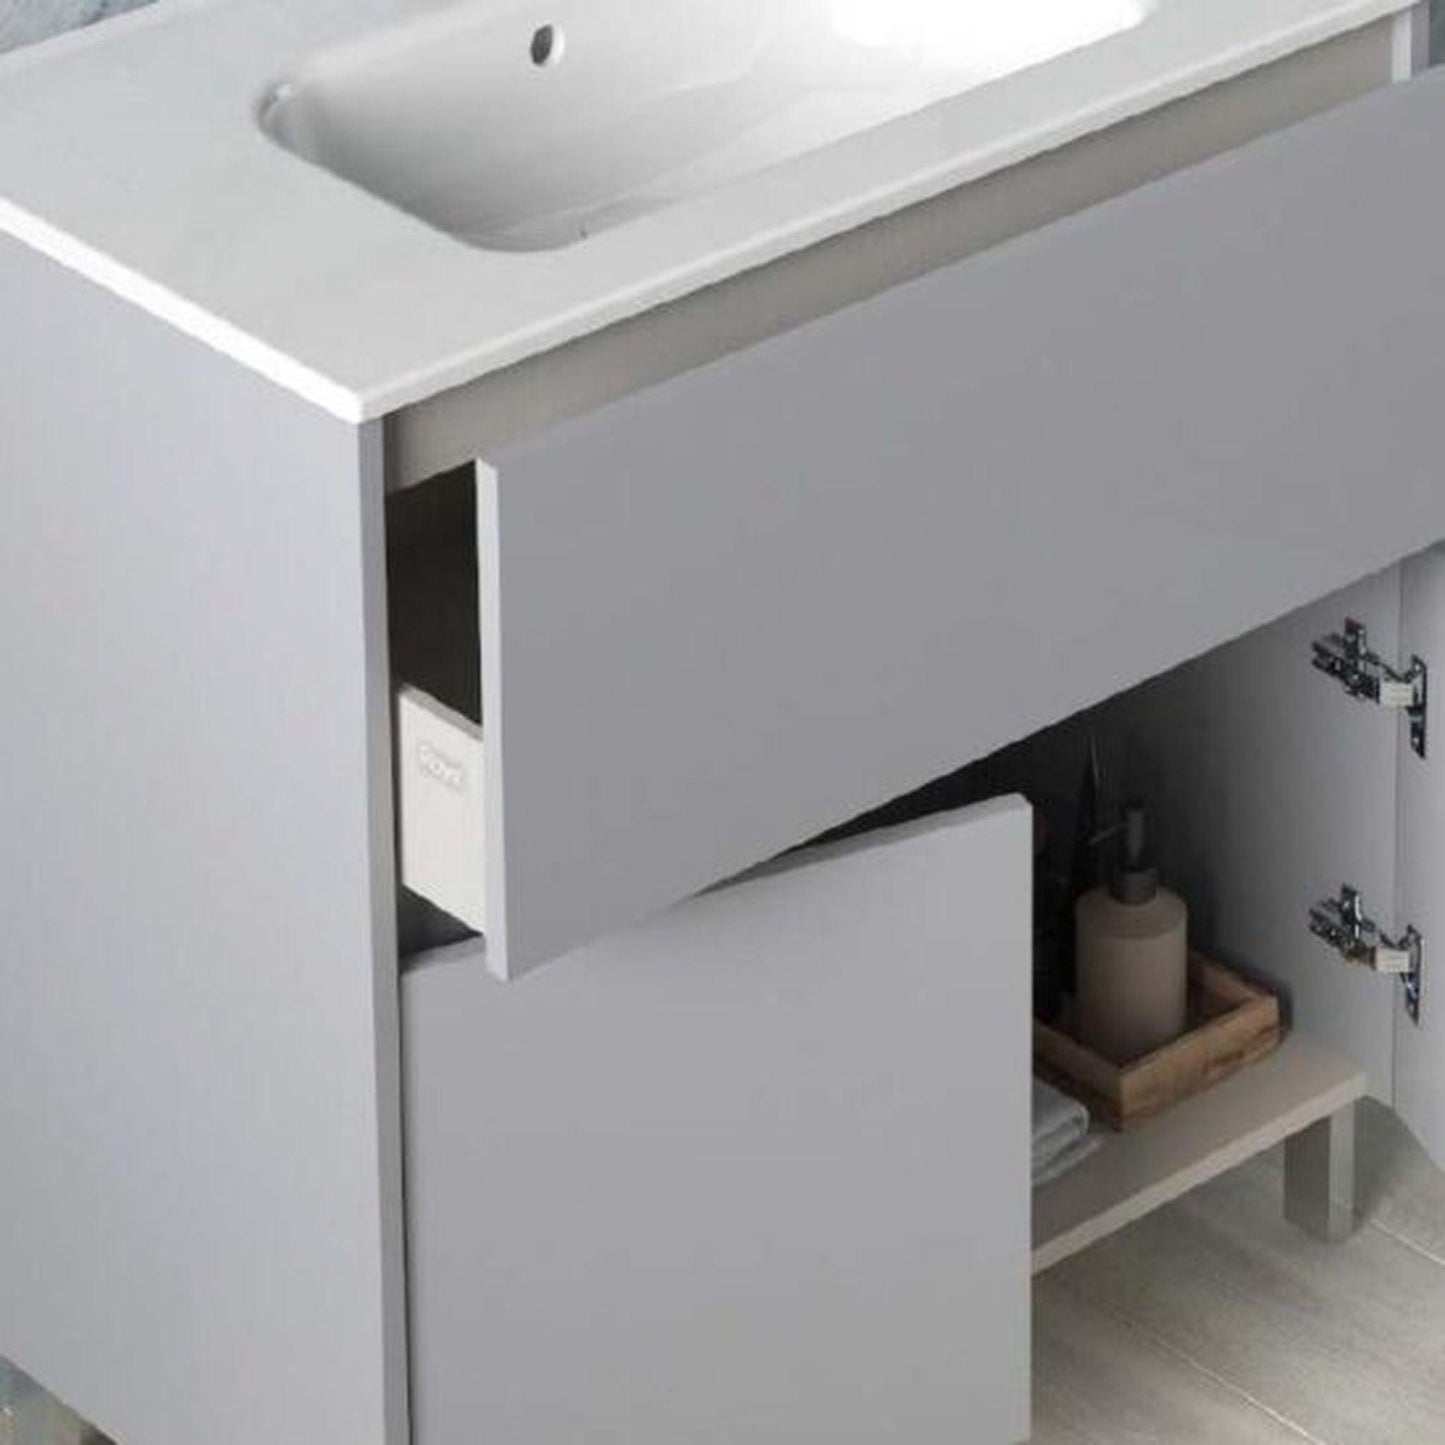 Royo Band 24” x 18” Gloss Galet Modern Freestanding Vanity With 1 Drawer and 2 Doors